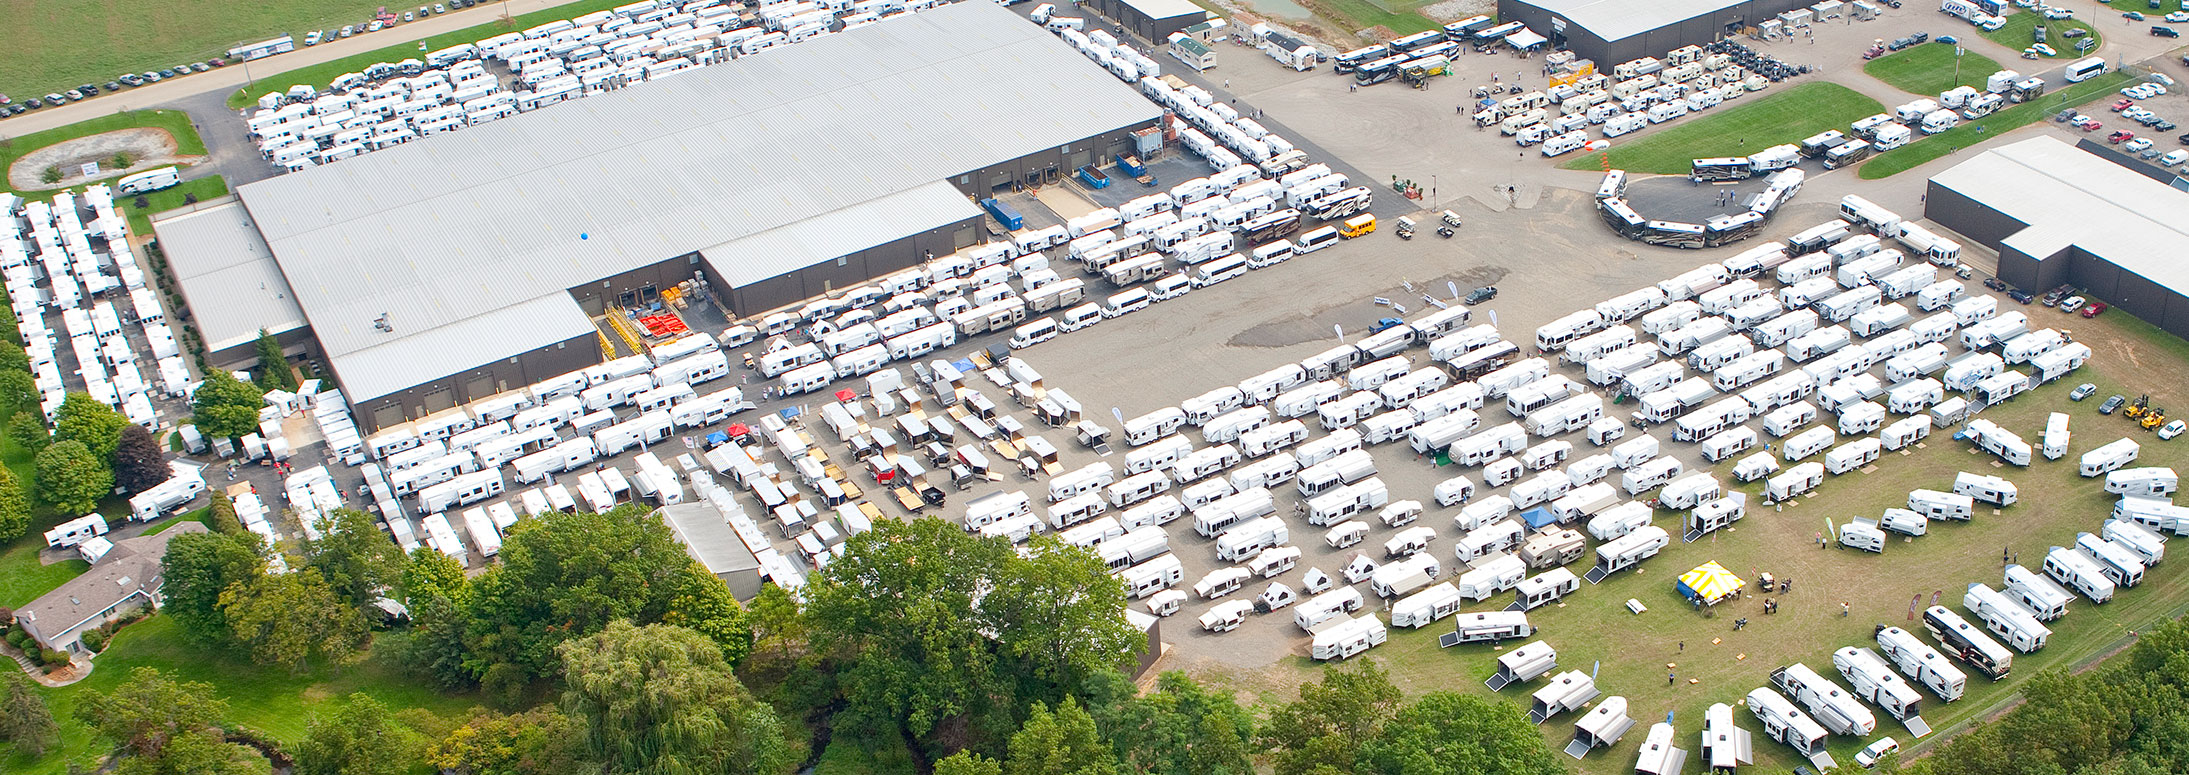 Aerial view of large recreational vehicle expo